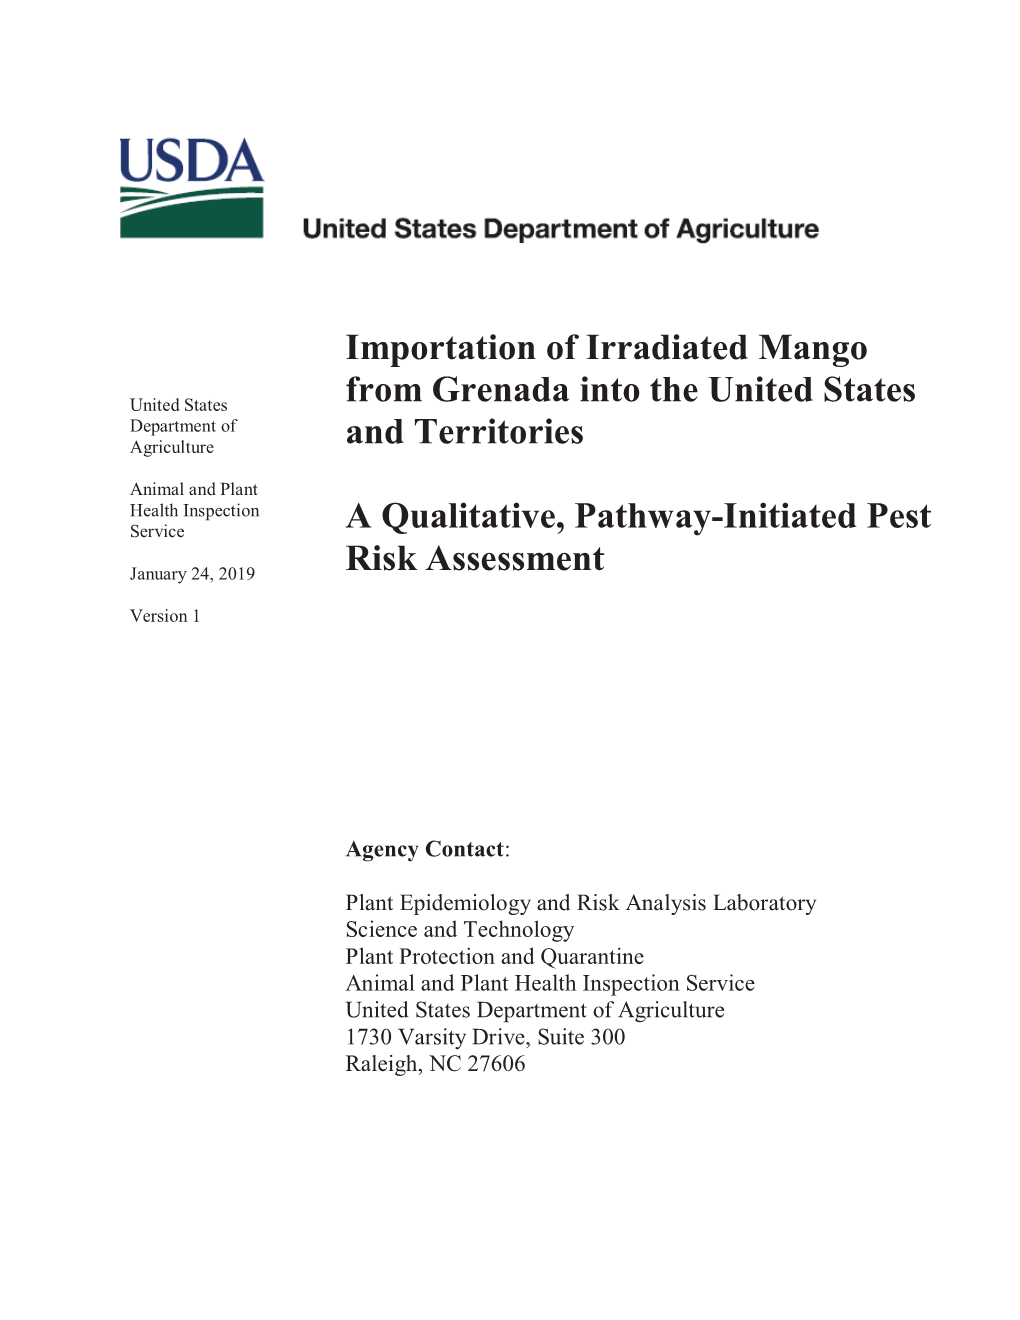 Importation of Irradiated Mango from Grenada Into the United States And